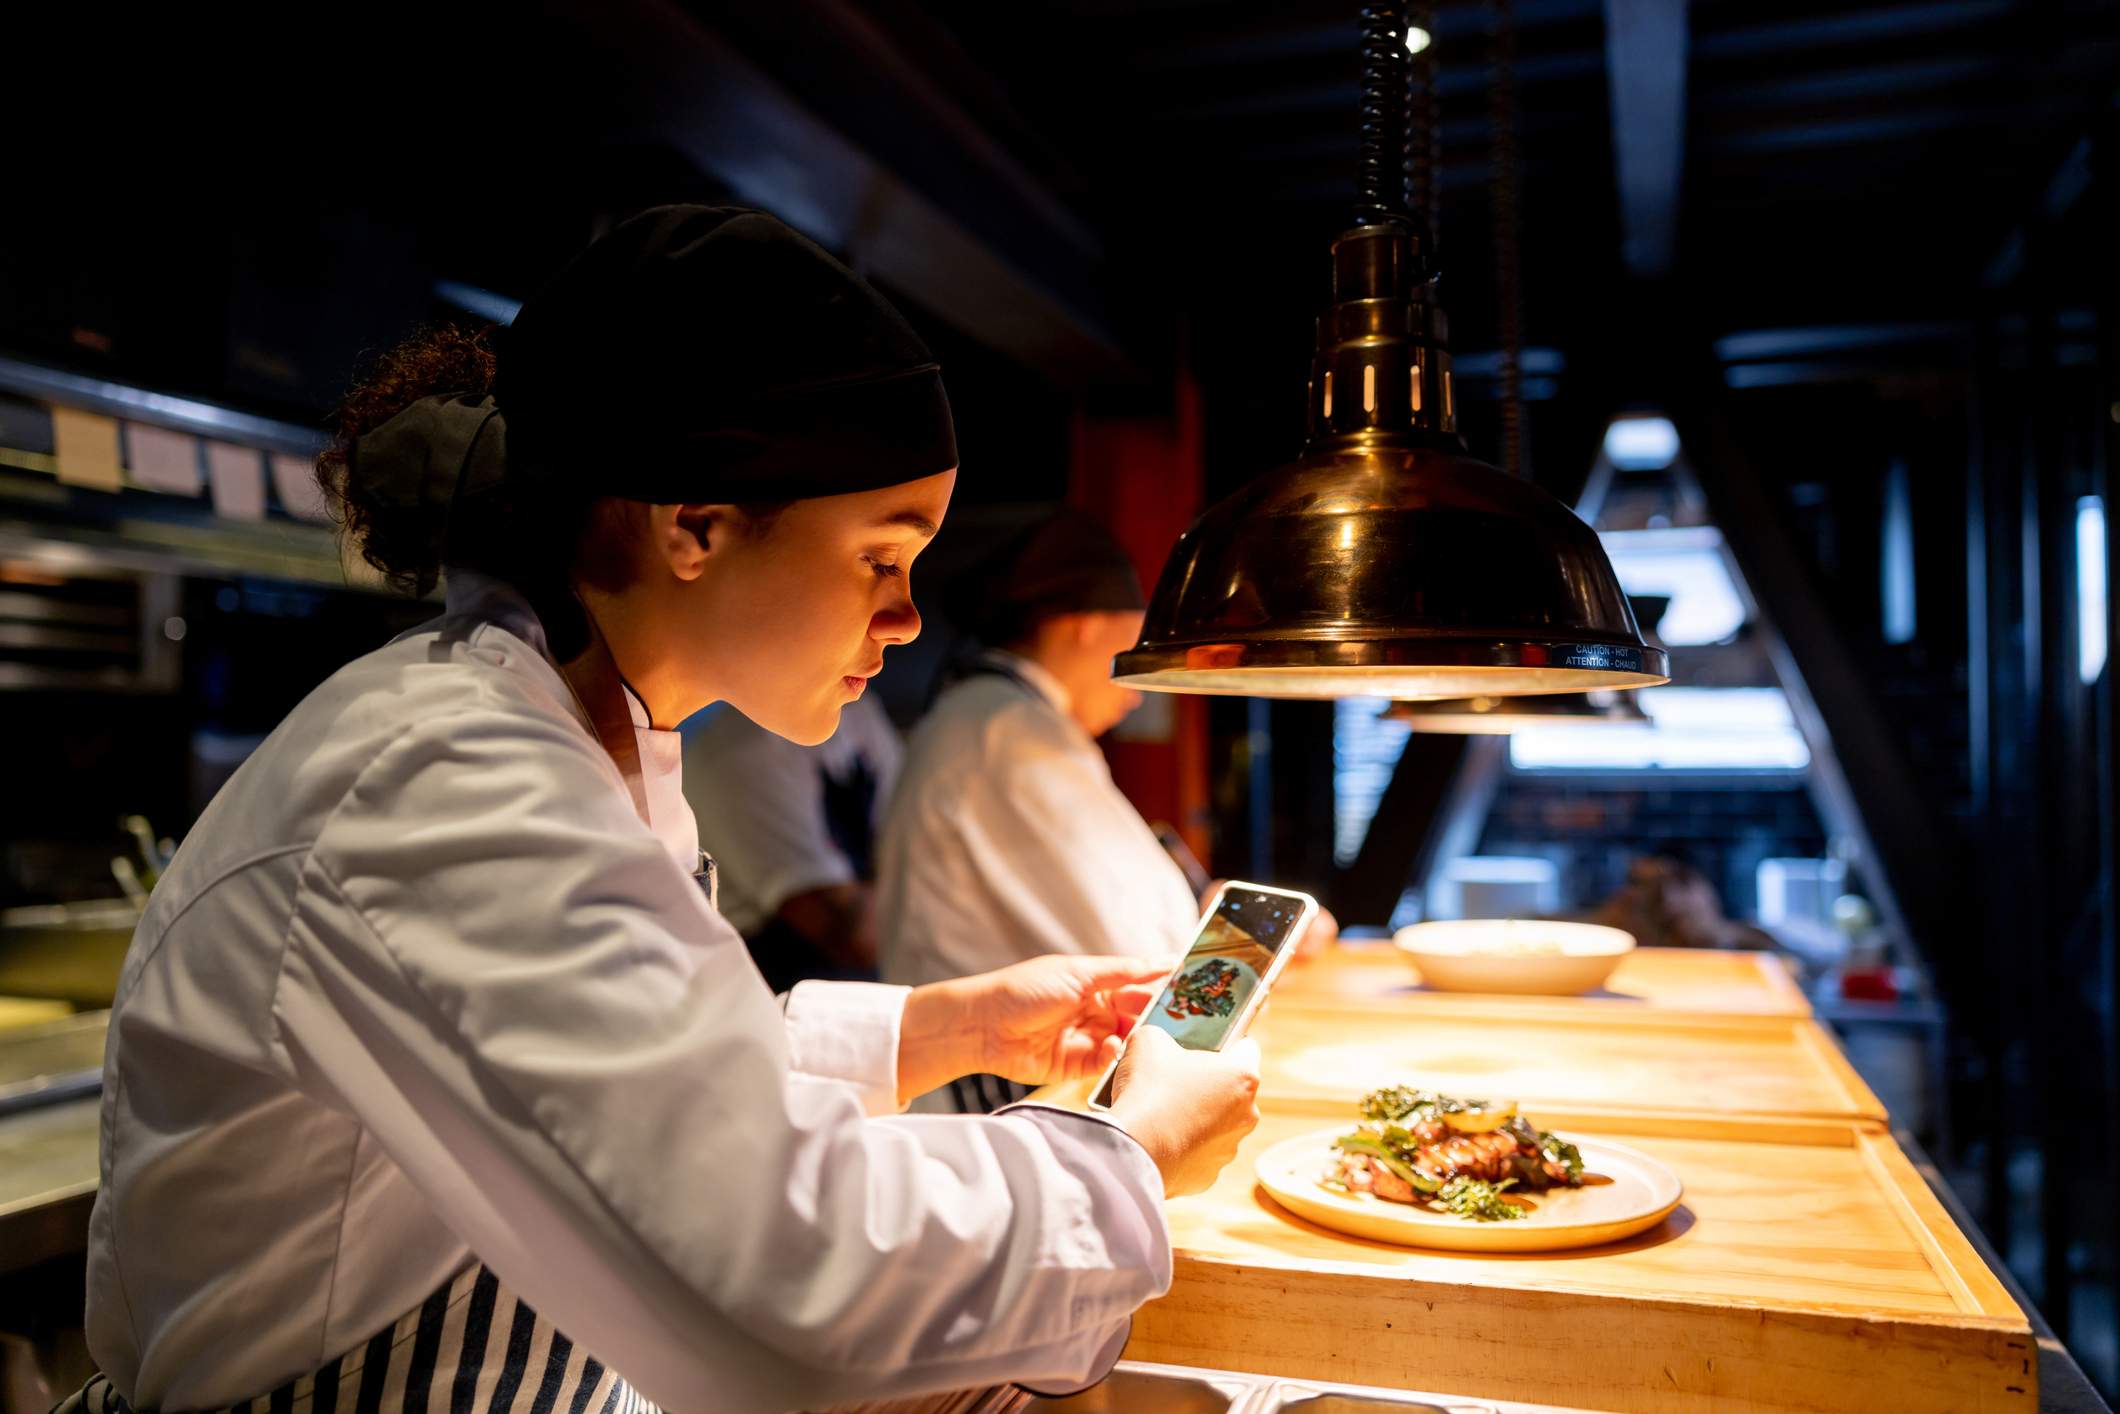 Image depicts a restaurant worker photographing food. 